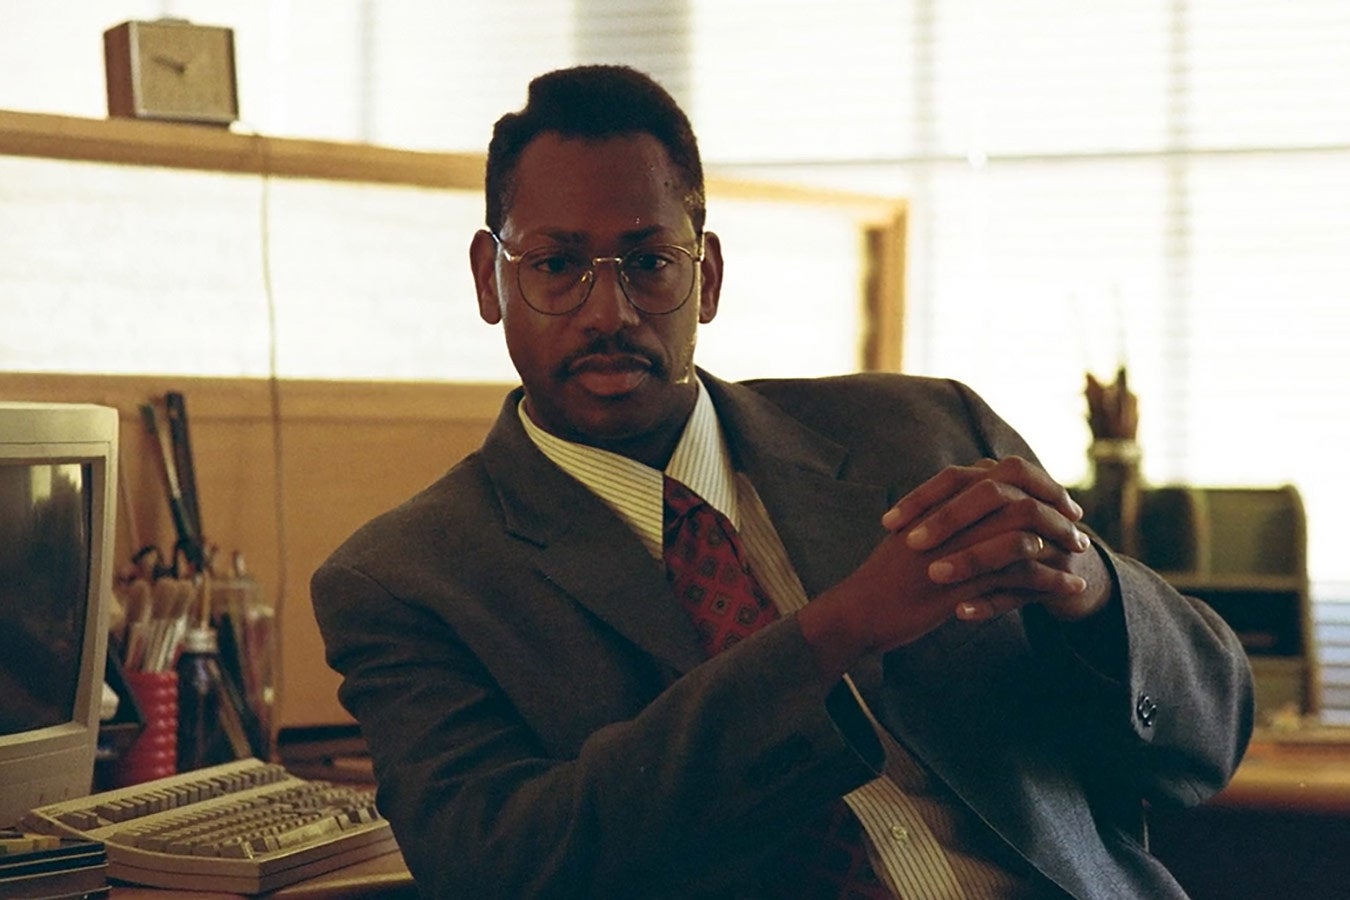 A Black man in an ’80s-era suit and wire-rimmed glasses looks ahead intently.